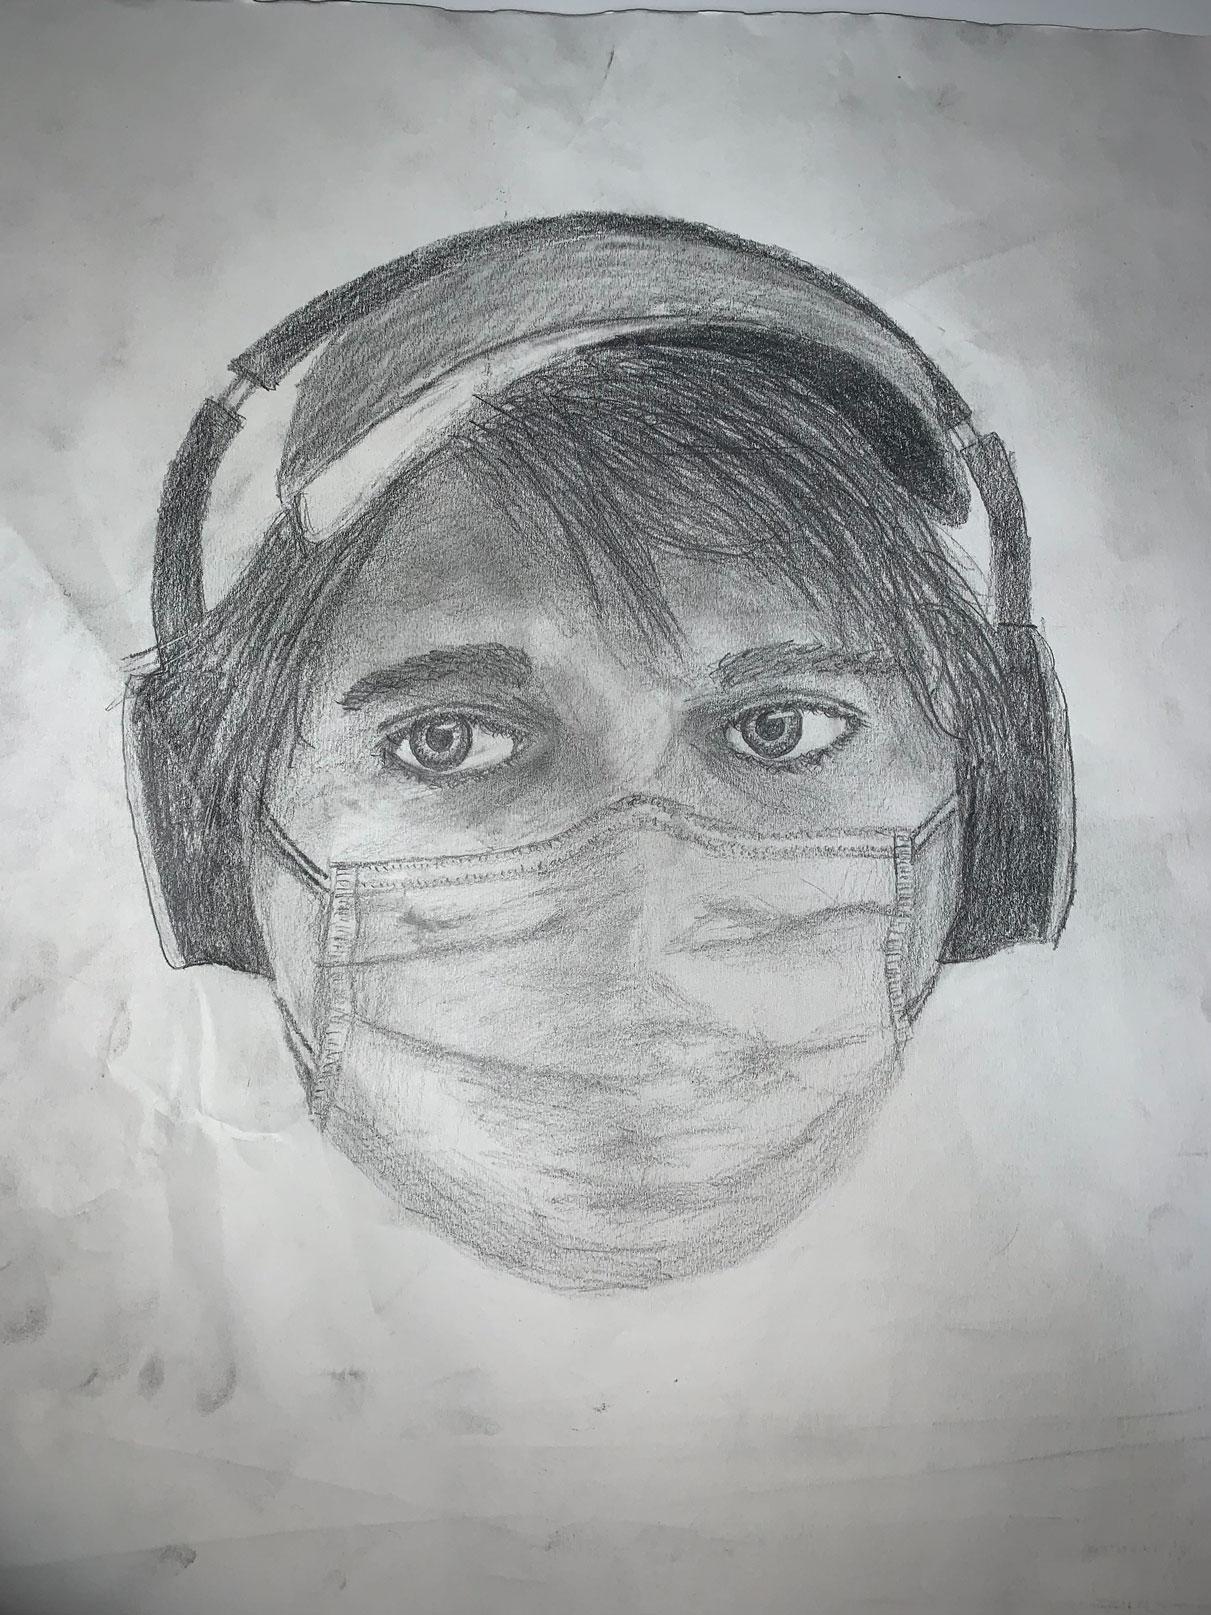 Pencil drawing of a young many wearing a hat, facemask, and headphones.